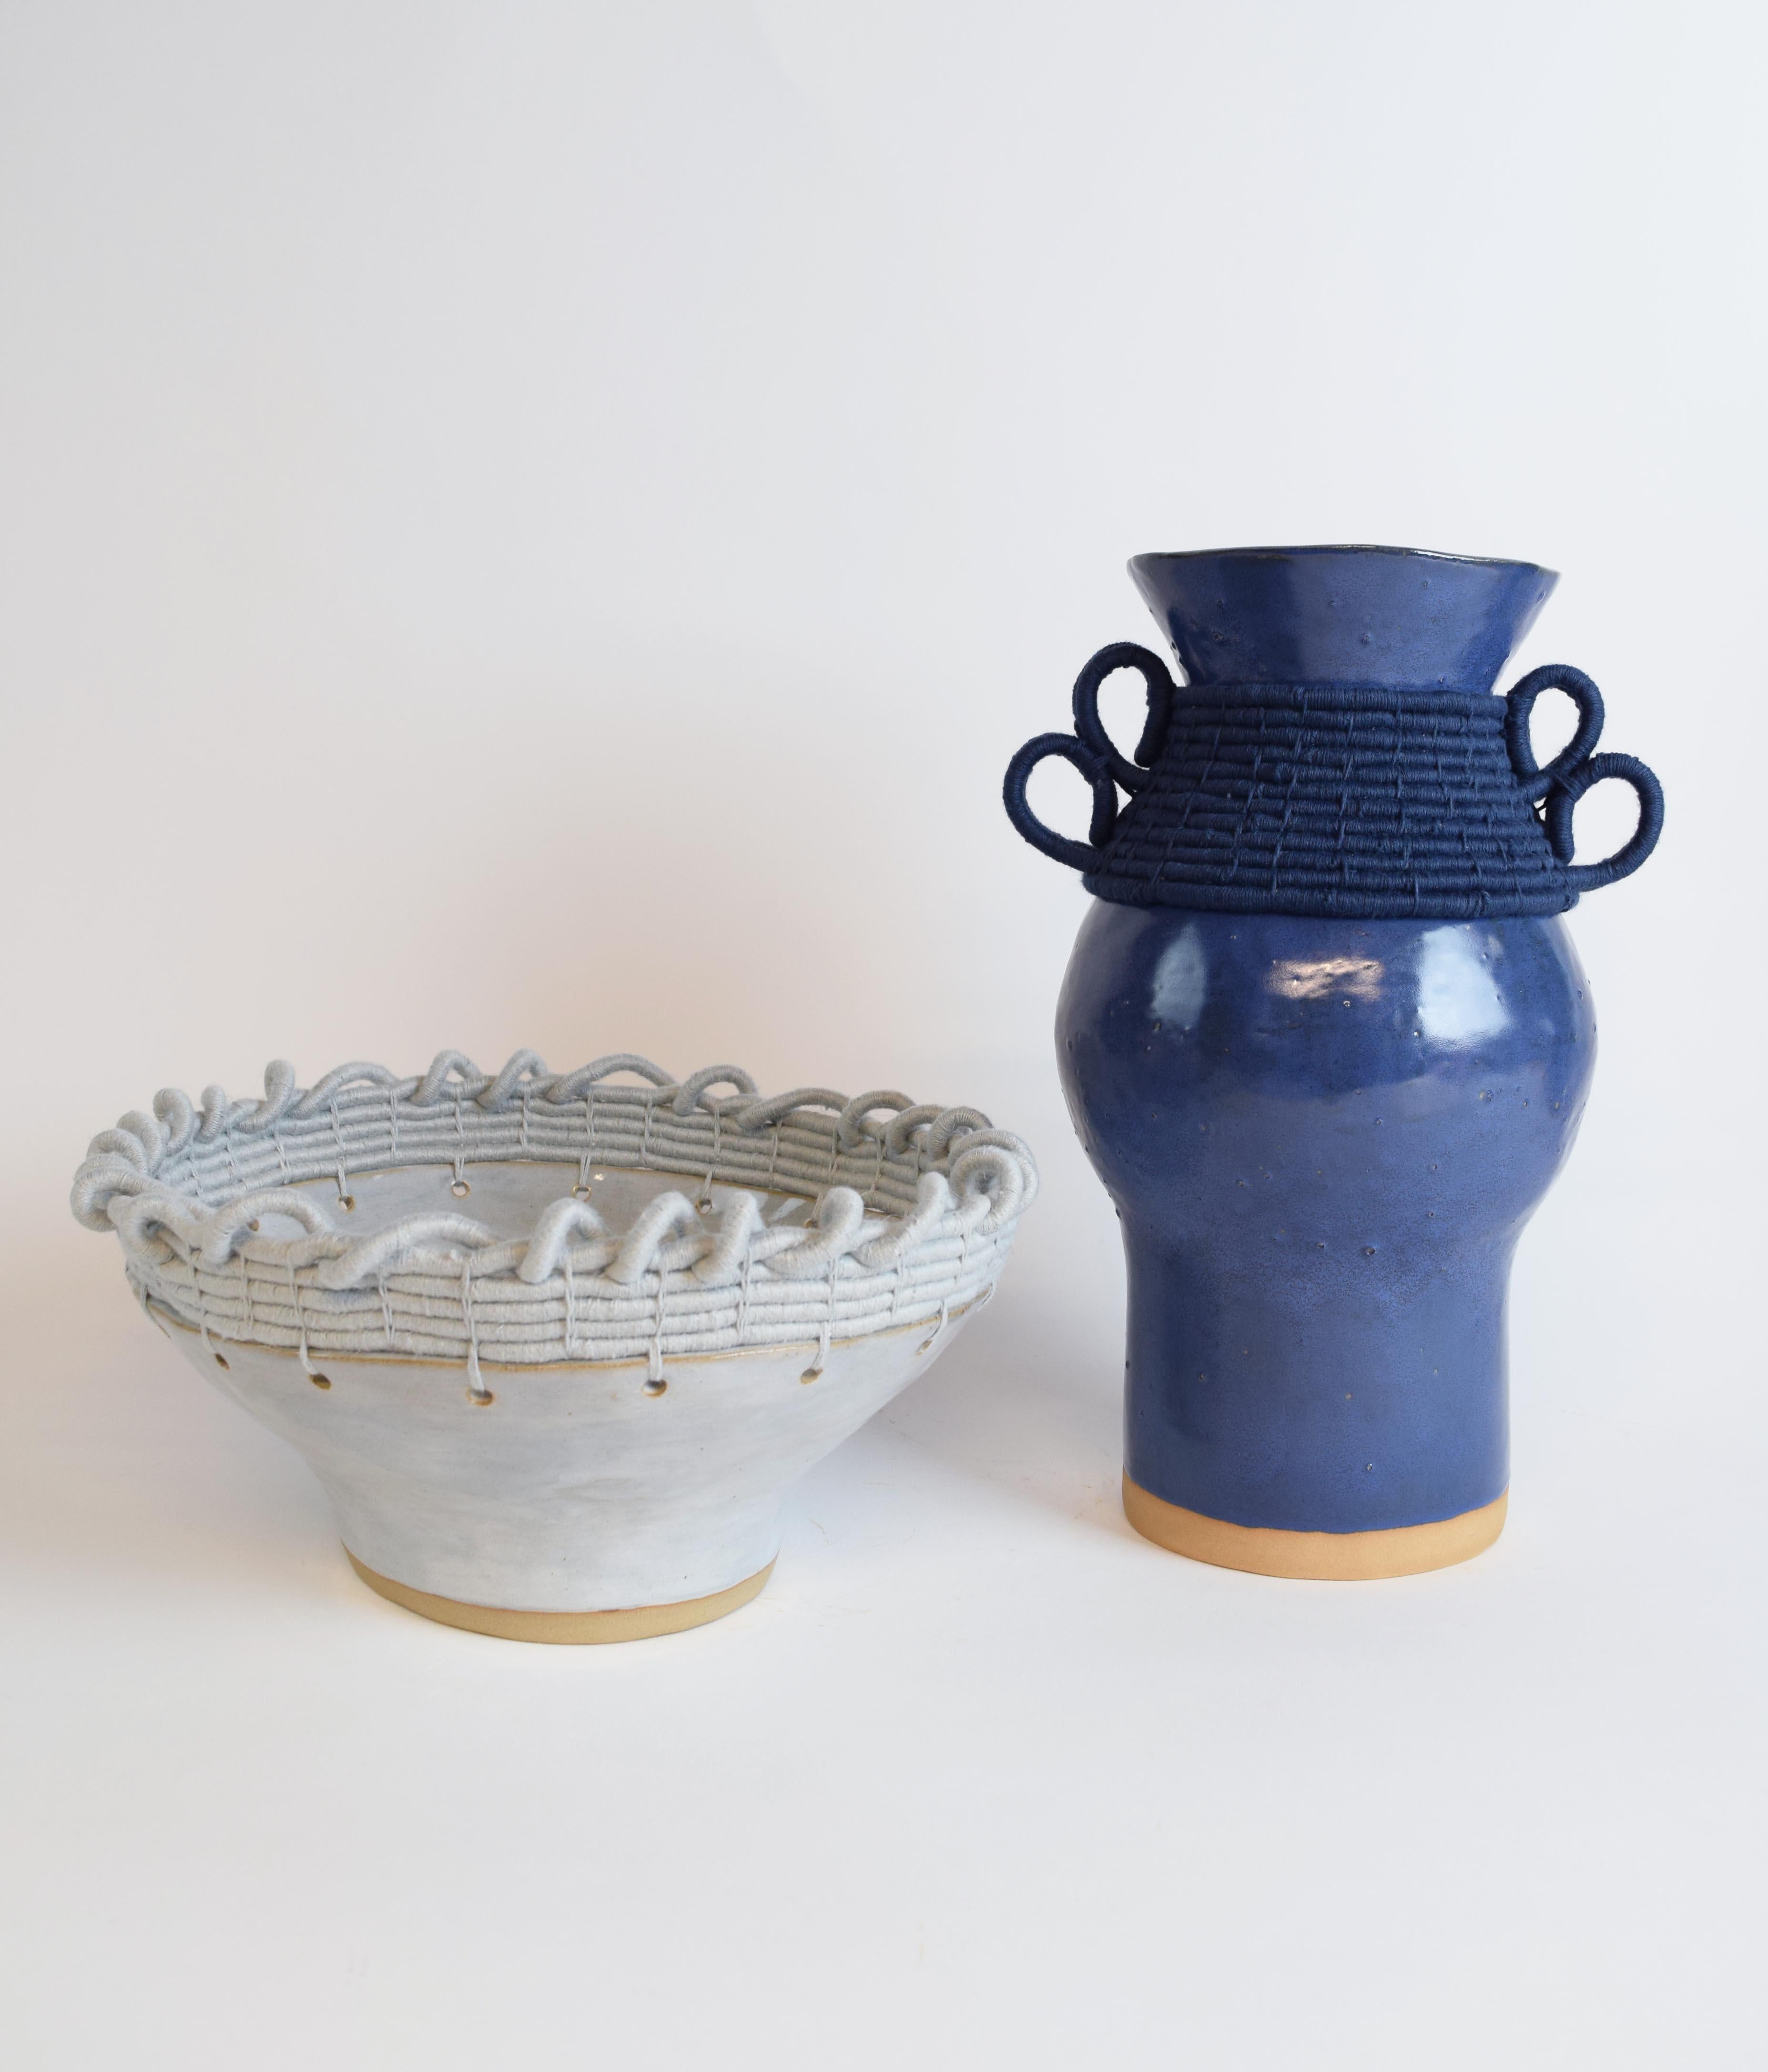 Hand-Crafted One of a Kind Handmade Ceramic Vase #780, Blue Glaze, Woven Navy Cotton Detail